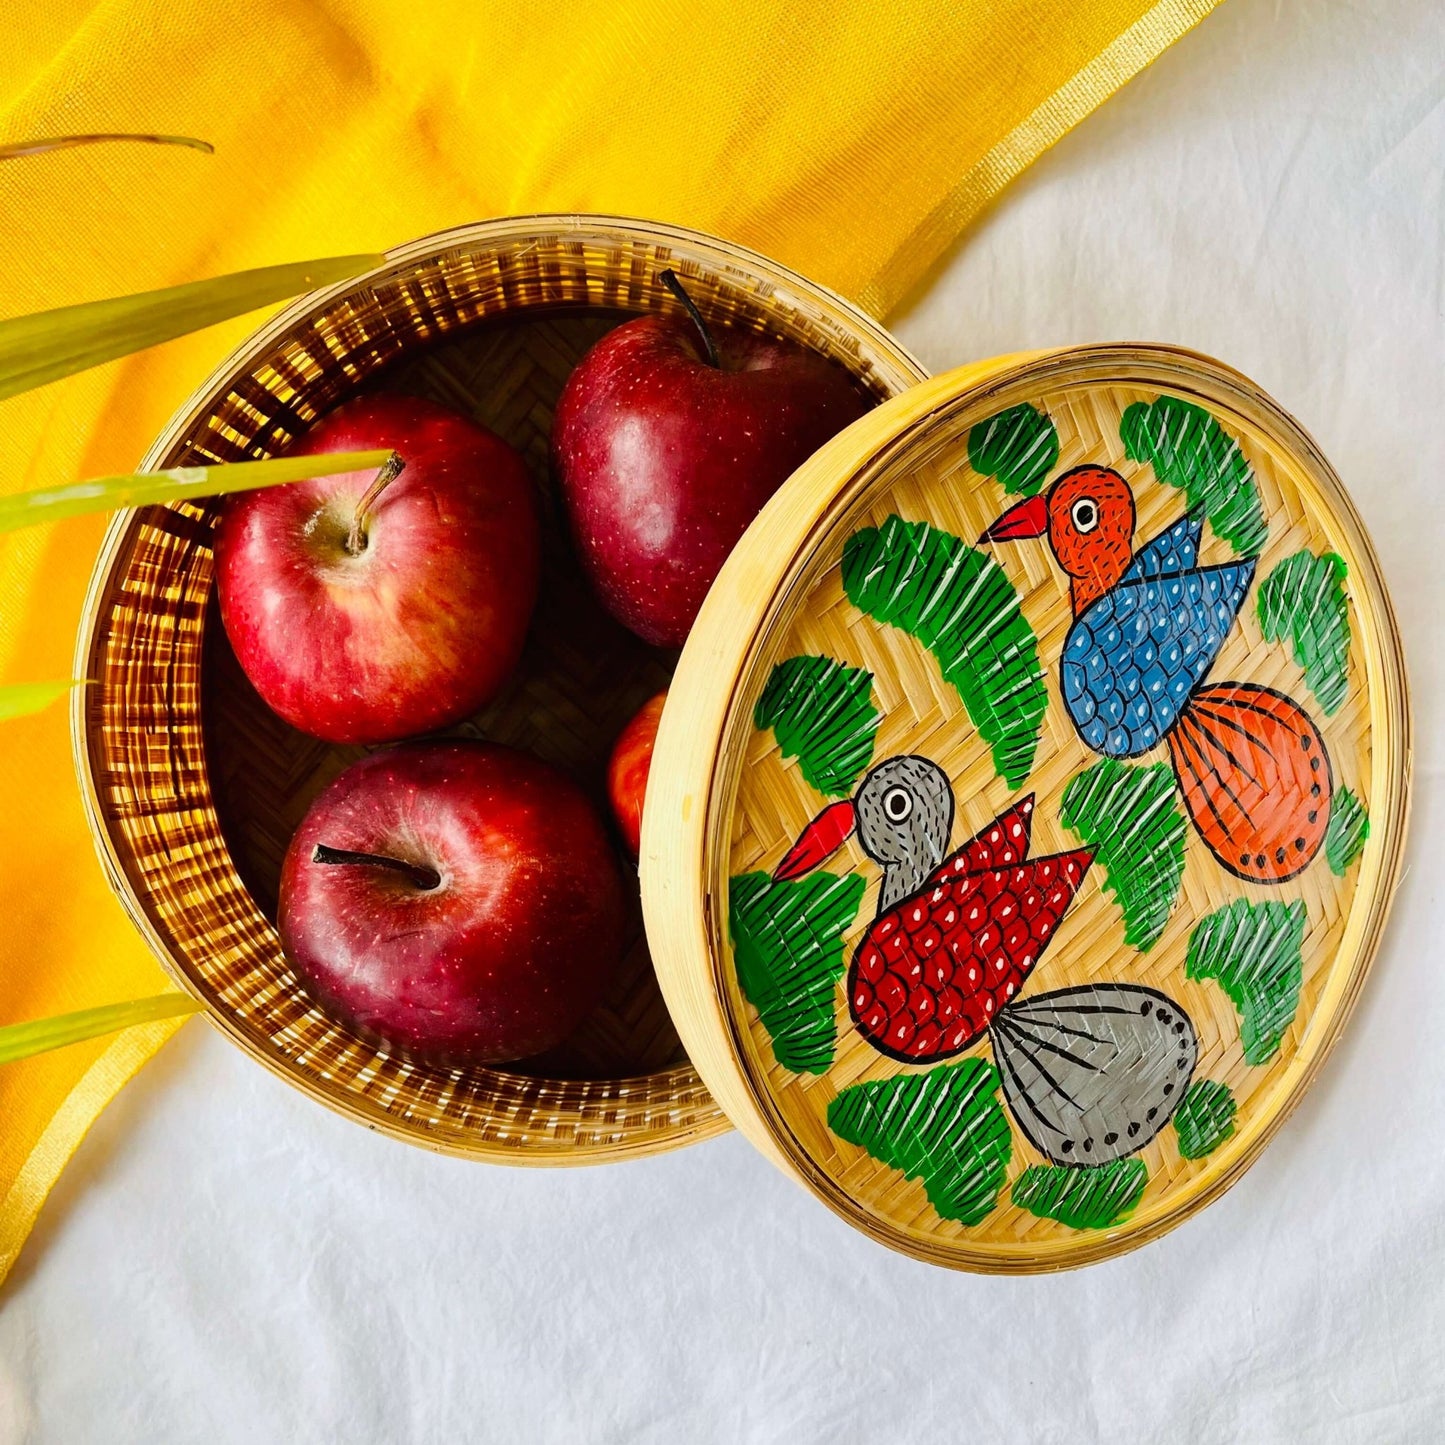 A handwoven bamboo box hand painted with one orange bird having blue wings and one gray bird having red wings flying over a green field and filled with four apples is displayed against a yellow and white background